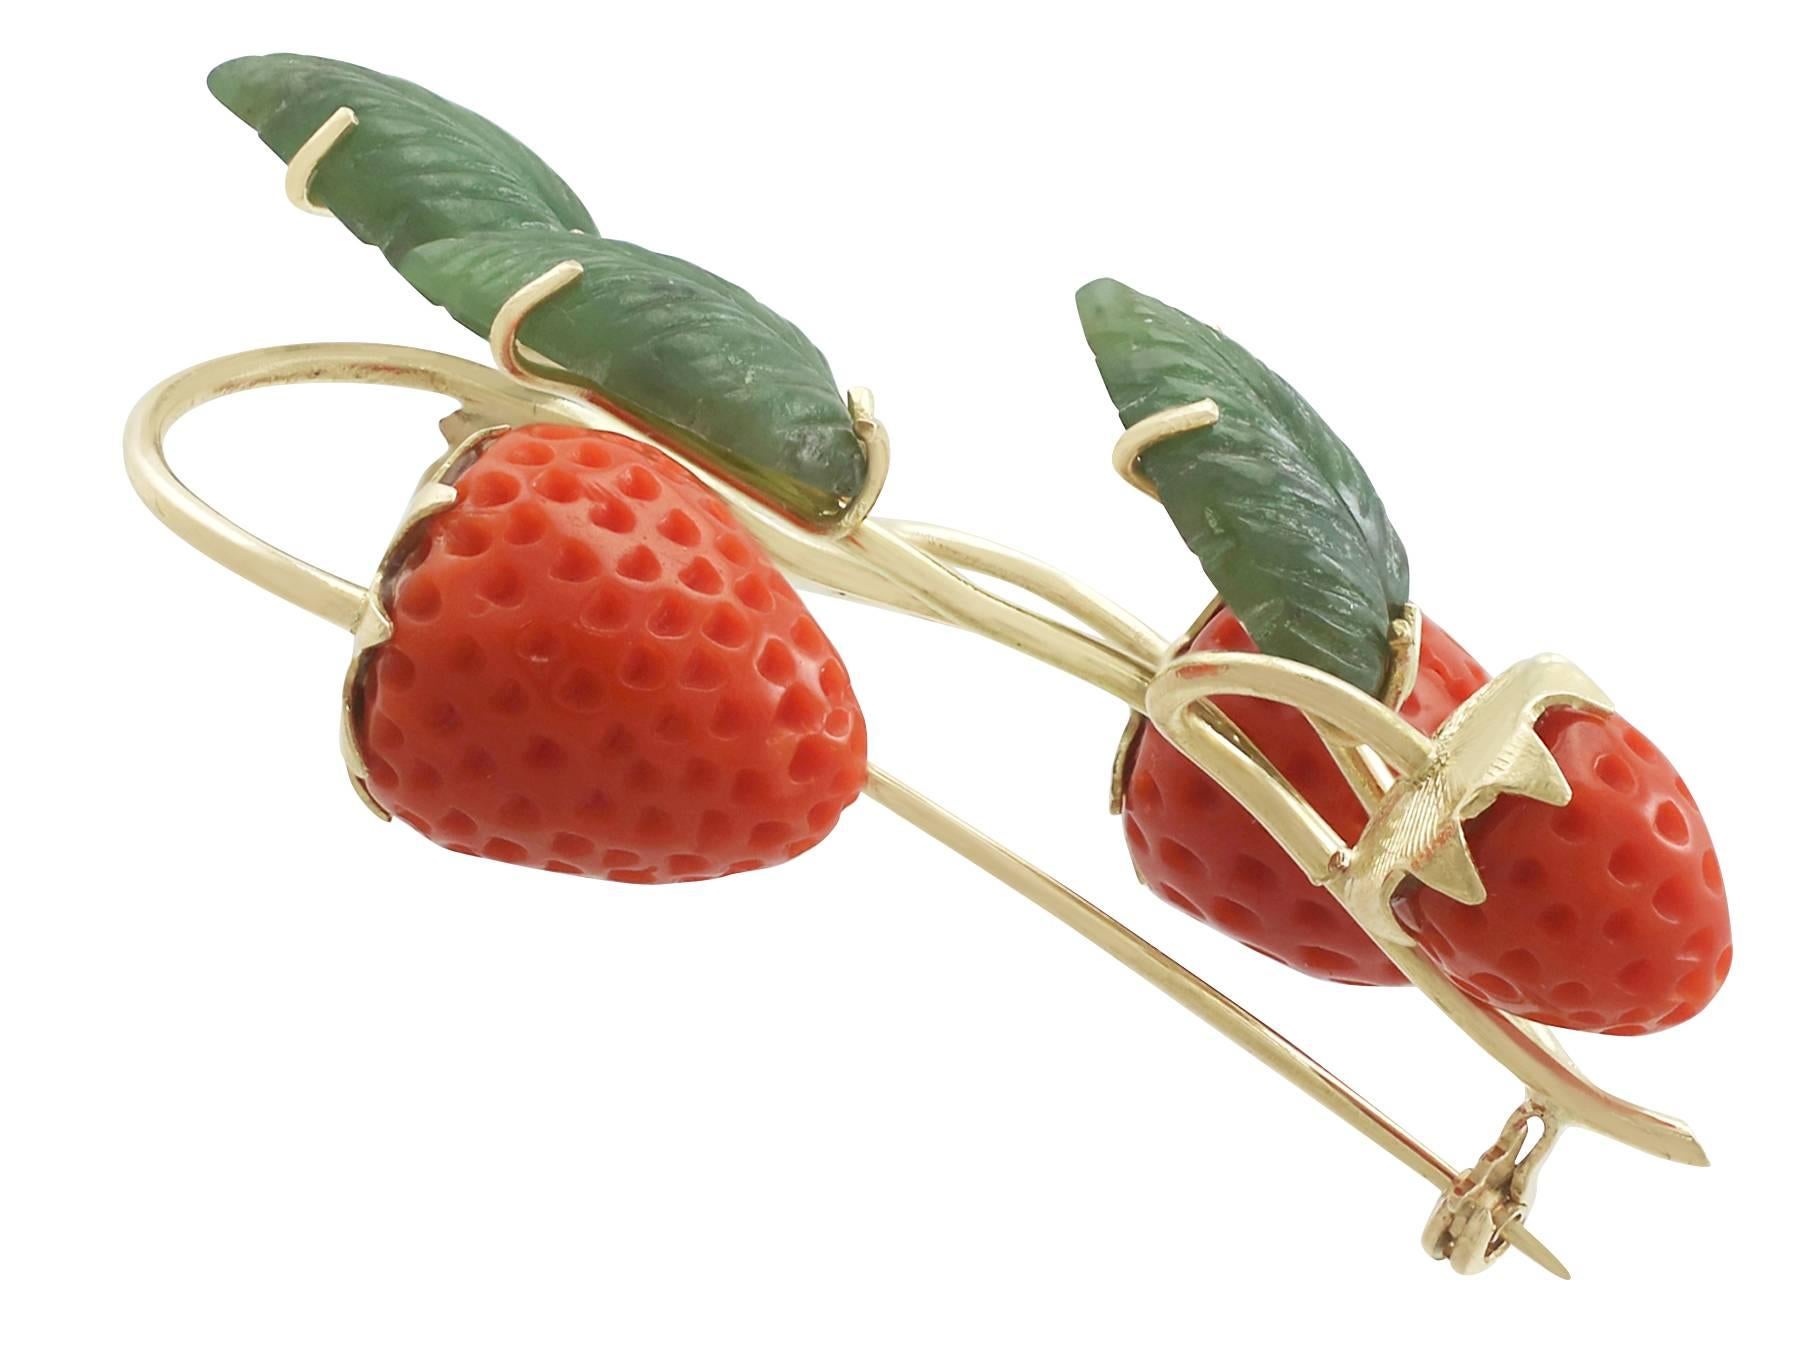 An impressive vintage nephrite jade and red coral, 18 carat yellow gold 'strawberry' brooch; part of our diverse gemstone jewellery and estate jewelry collections.

This fine and impressive vintage strawberry brooch has been crafted in 18 ct yellow